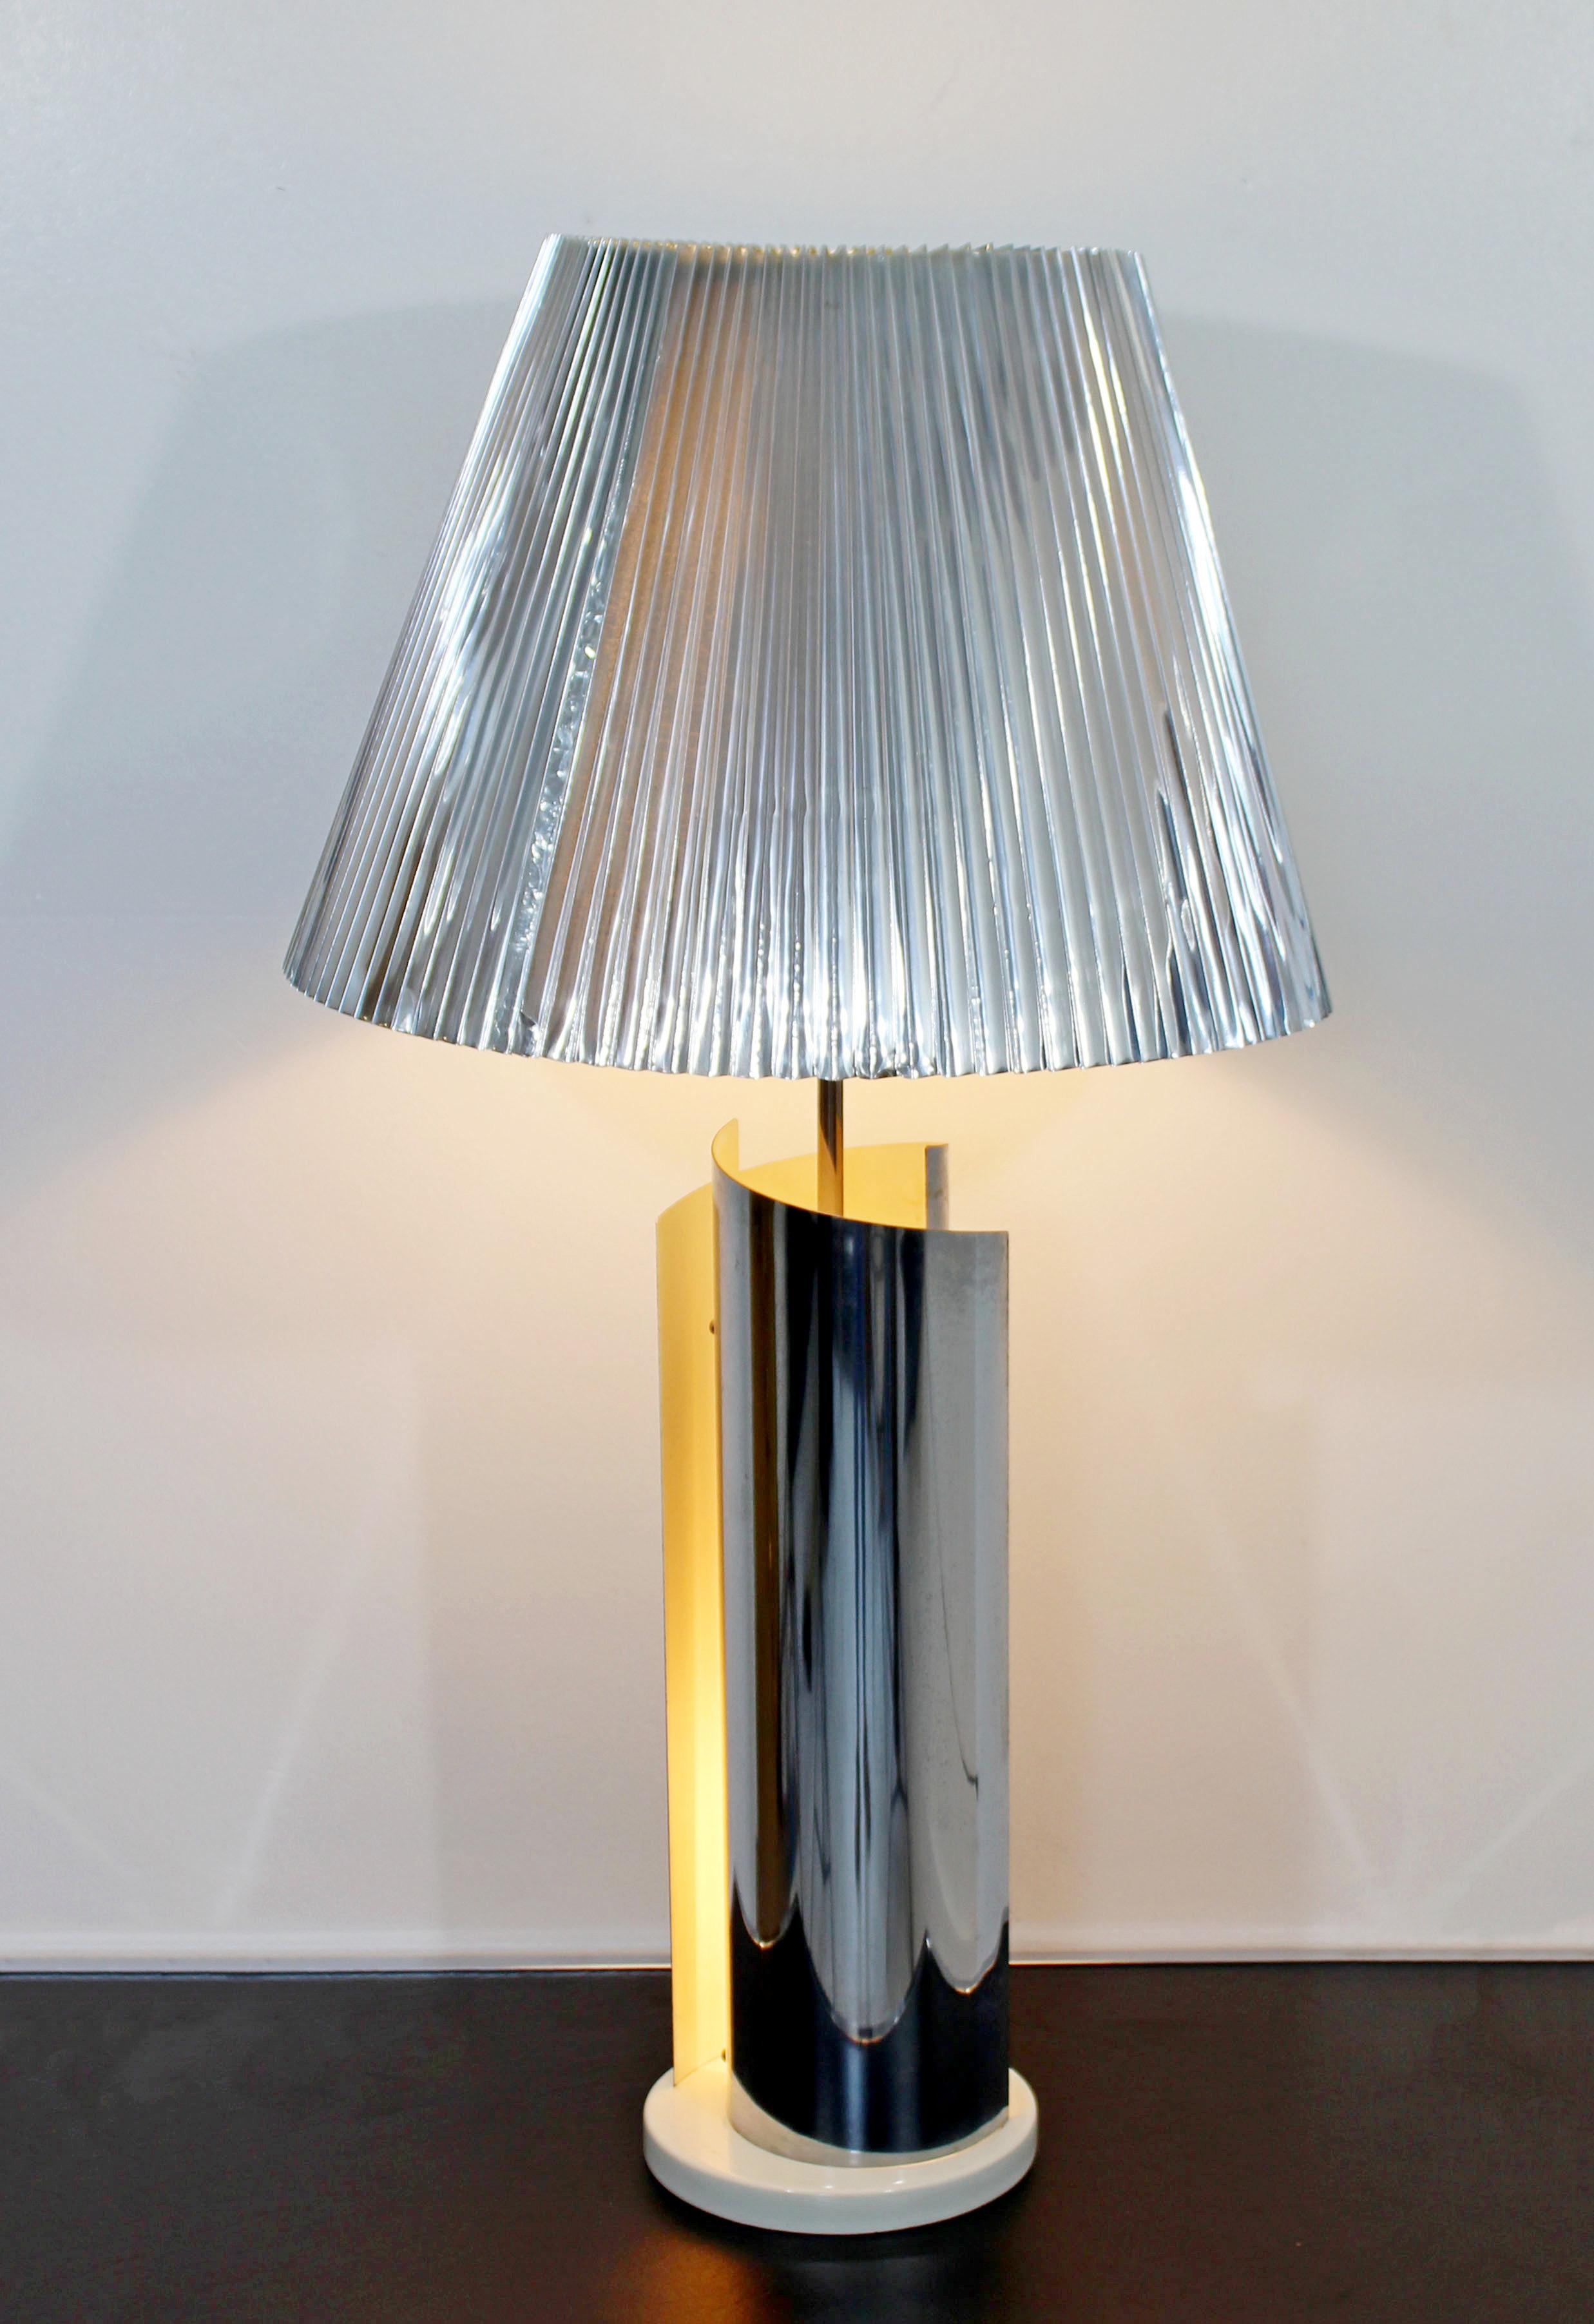 For your consideration is a magnificent Sonneman chrome table lamp, with original pleated chrome like shade and finial, circa the 1970s. In very good condition. Lights up from base and top. The dimensions of the lamp are 8